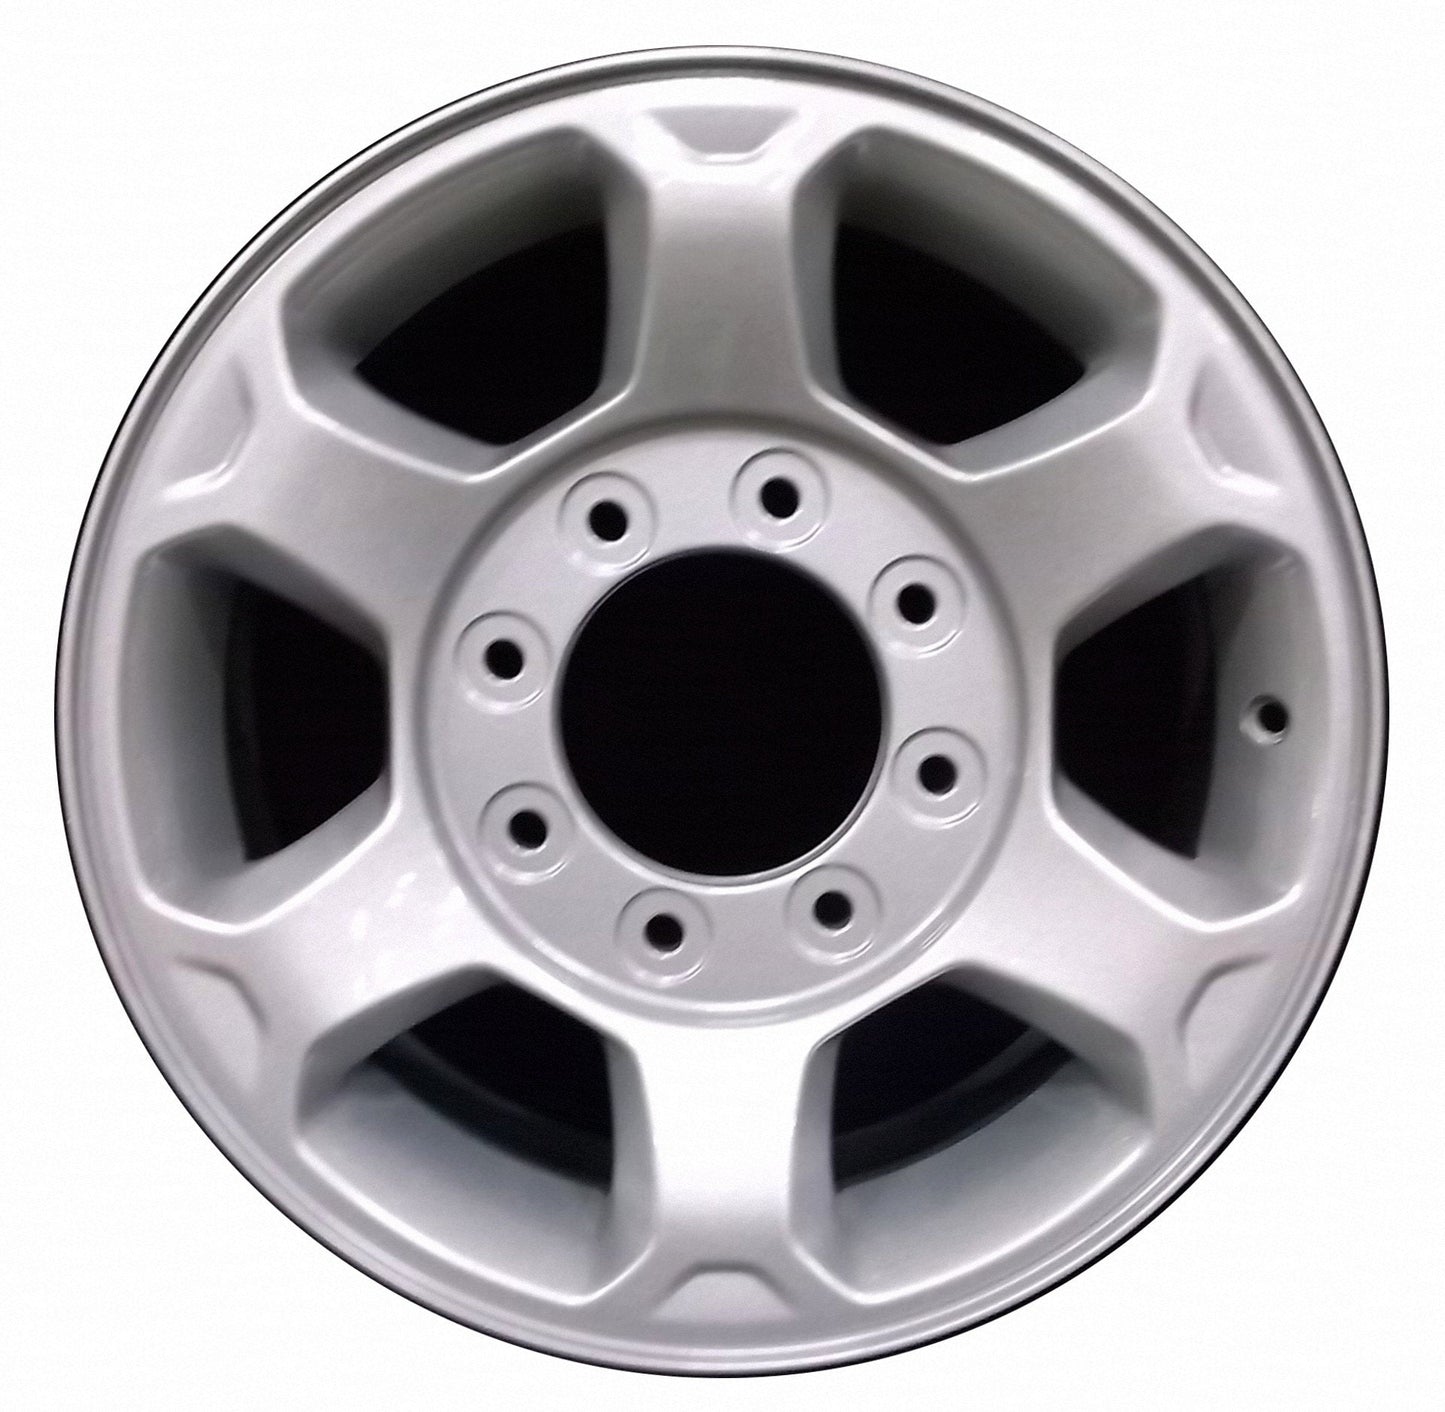 Ford F250 F350 Truck  2013, 2014, 2015, 2016 Factory OEM Car Wheel Size 17x7.5 Alloy WAO.3950.PS08.FF